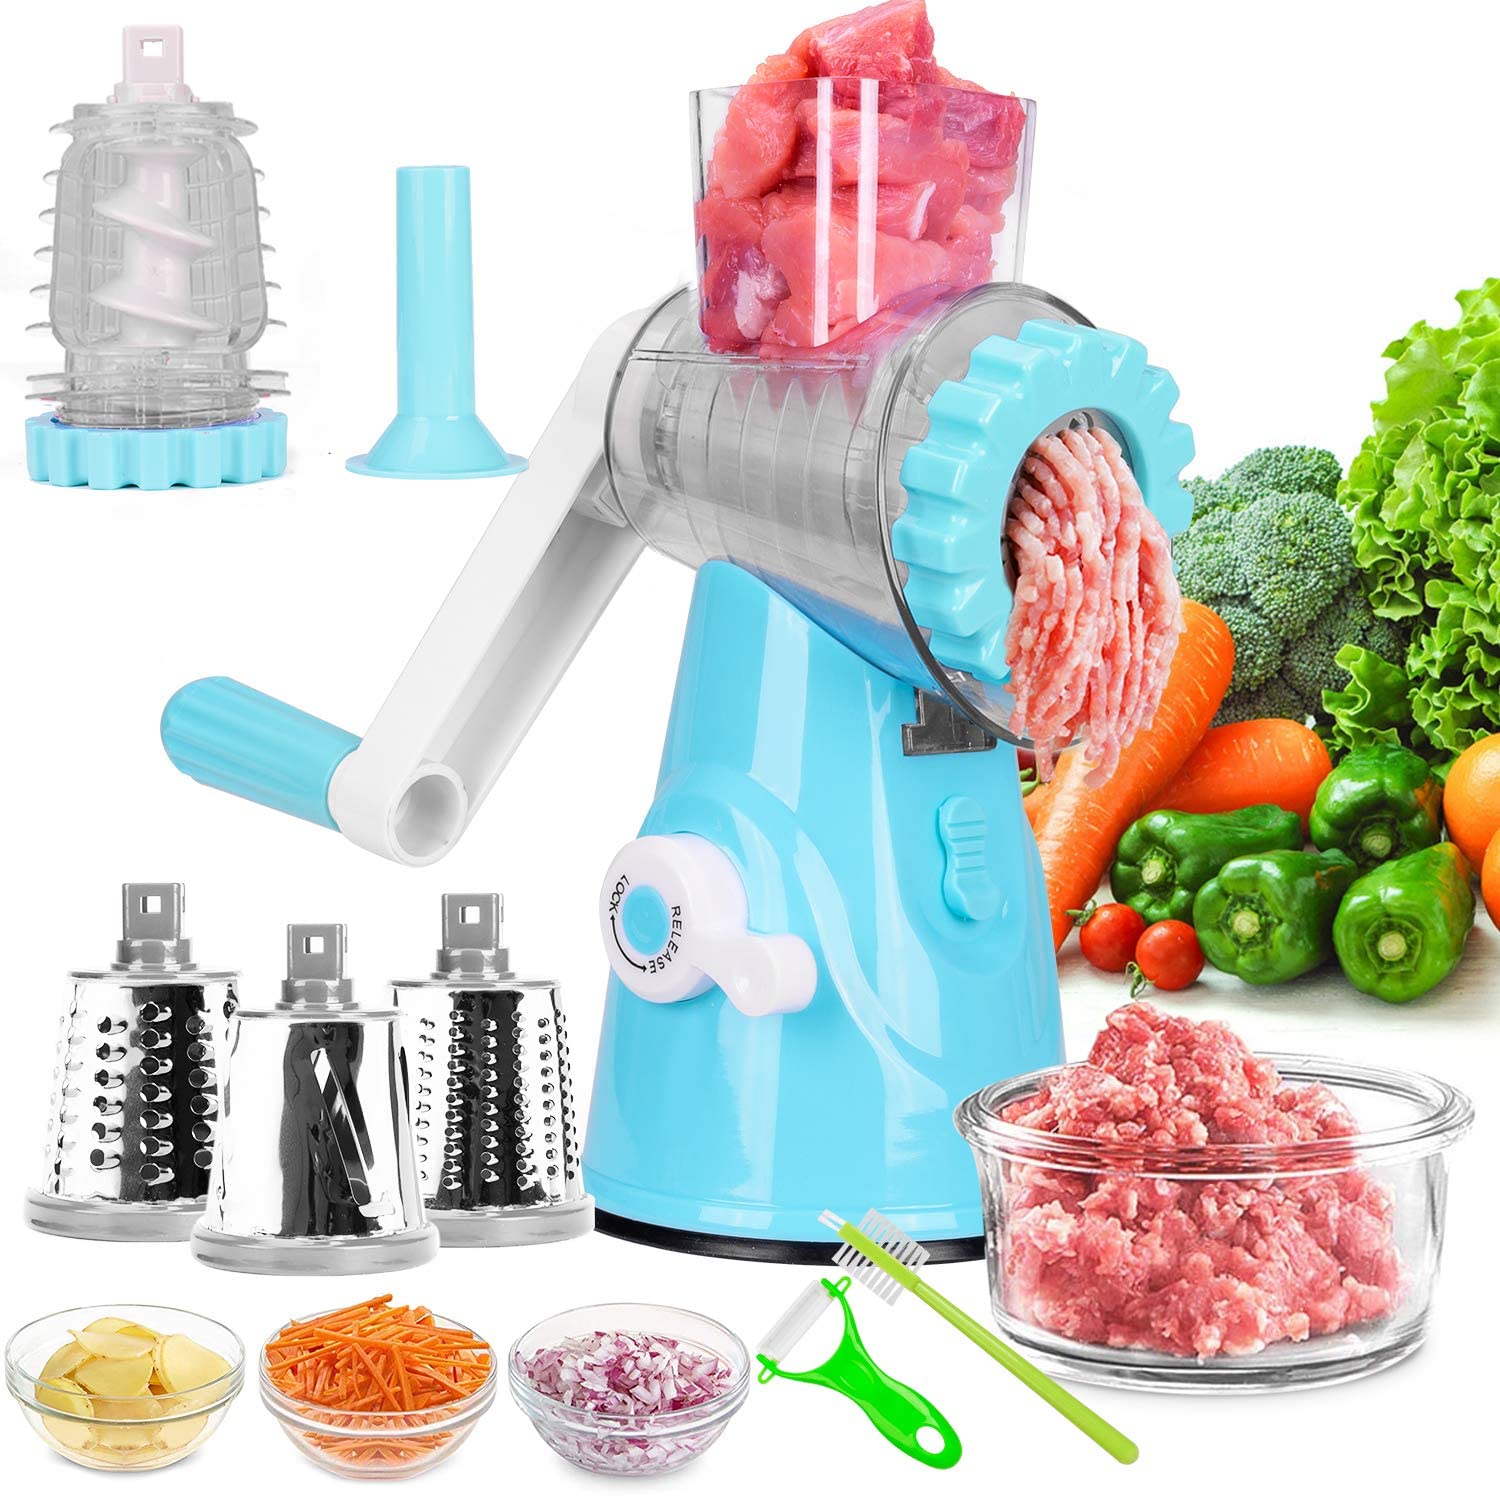 Bswalf Meat Mincer, Rotary Cheese Grater, Kitchen Multifunctional Meat Grinder with Strong Suction Base, 4 Interchangeable Blades for Ground Meat, Sausage, Vegetable Fruit Slice, Shreds, Nut Grinding (Blue)